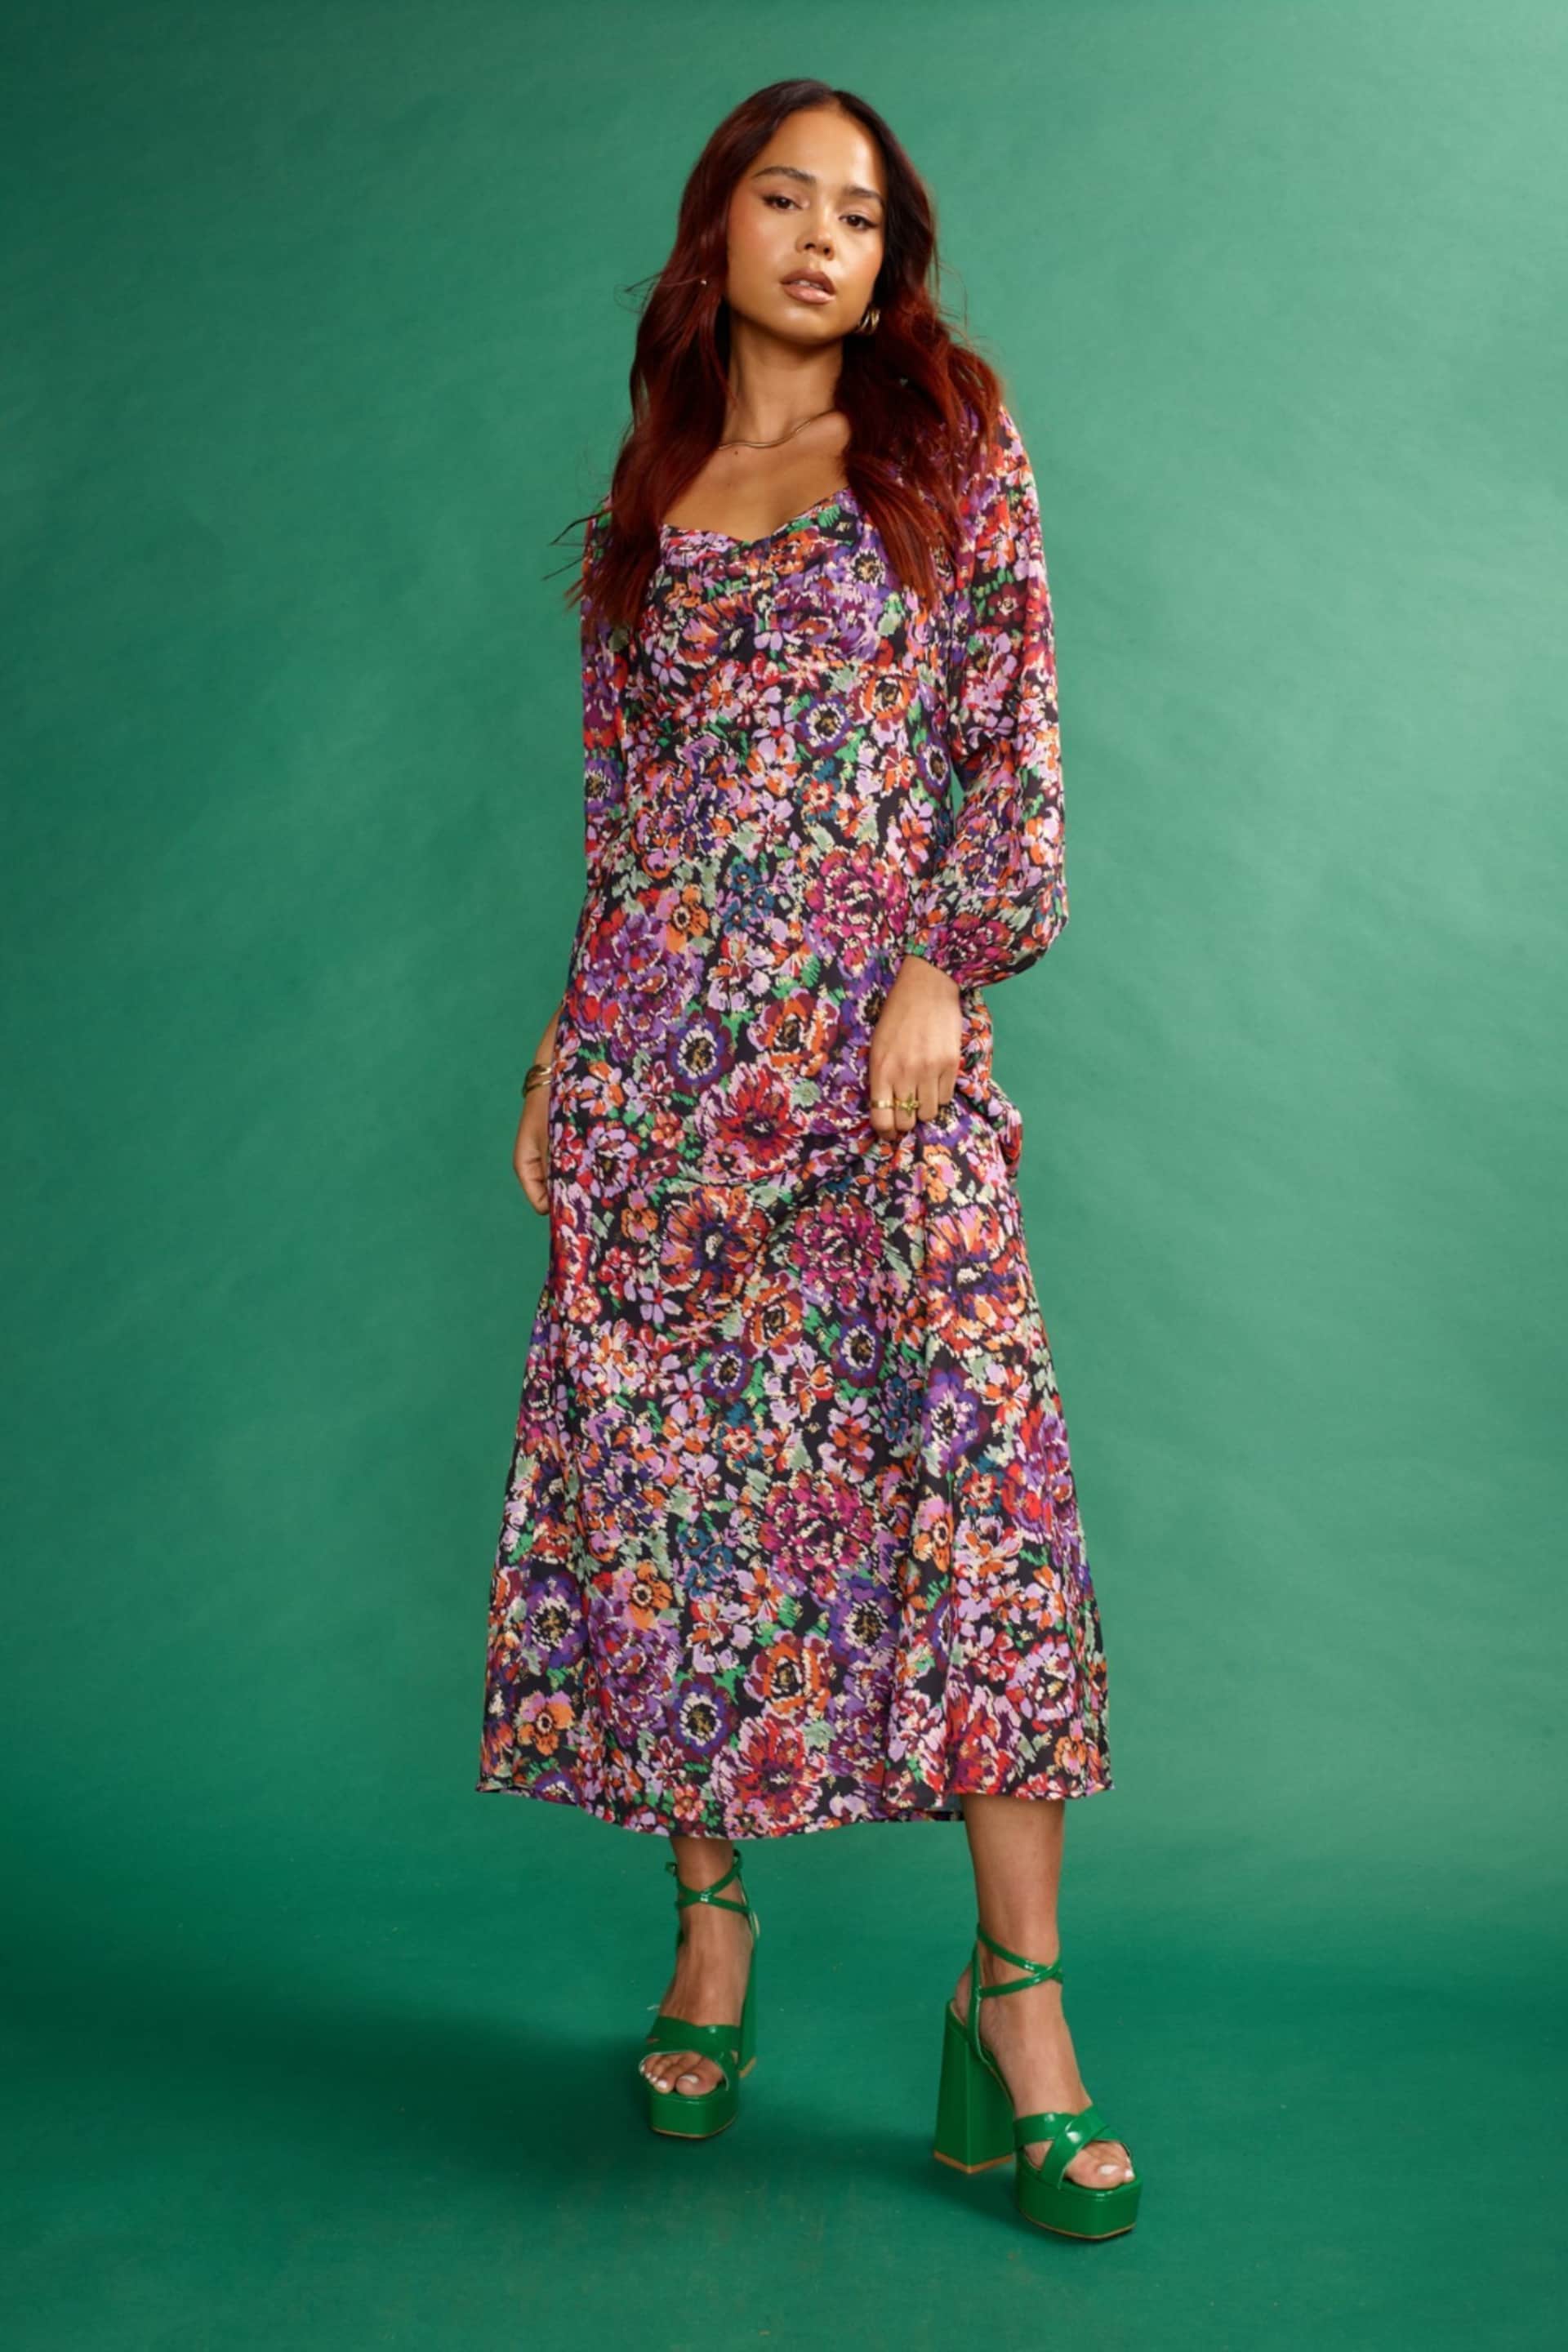 Another Sunday Milkmaid Midi Dress In A Floral Pink Print - Image 2 of 6